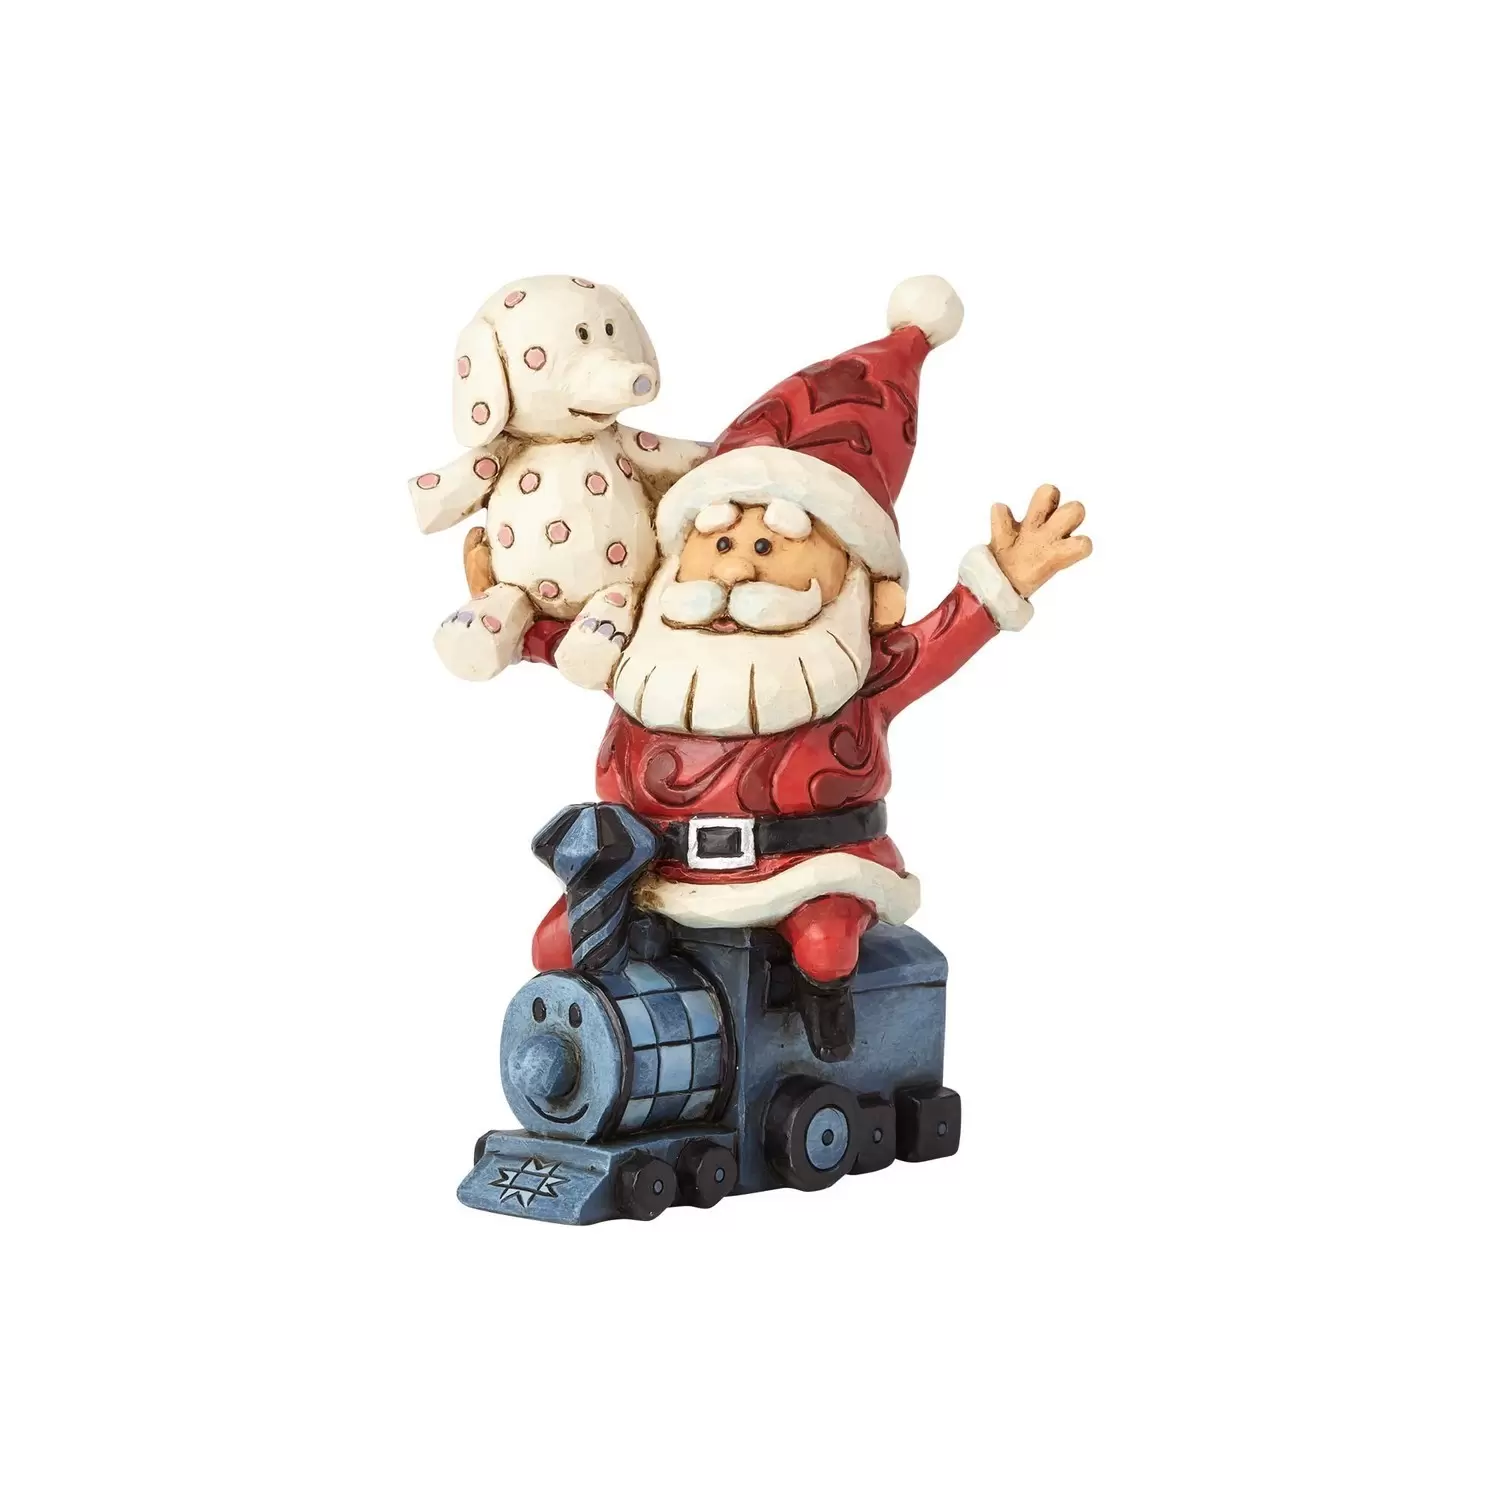 Cartoons Characters by Jim Shore - Santa with Misfit Toys